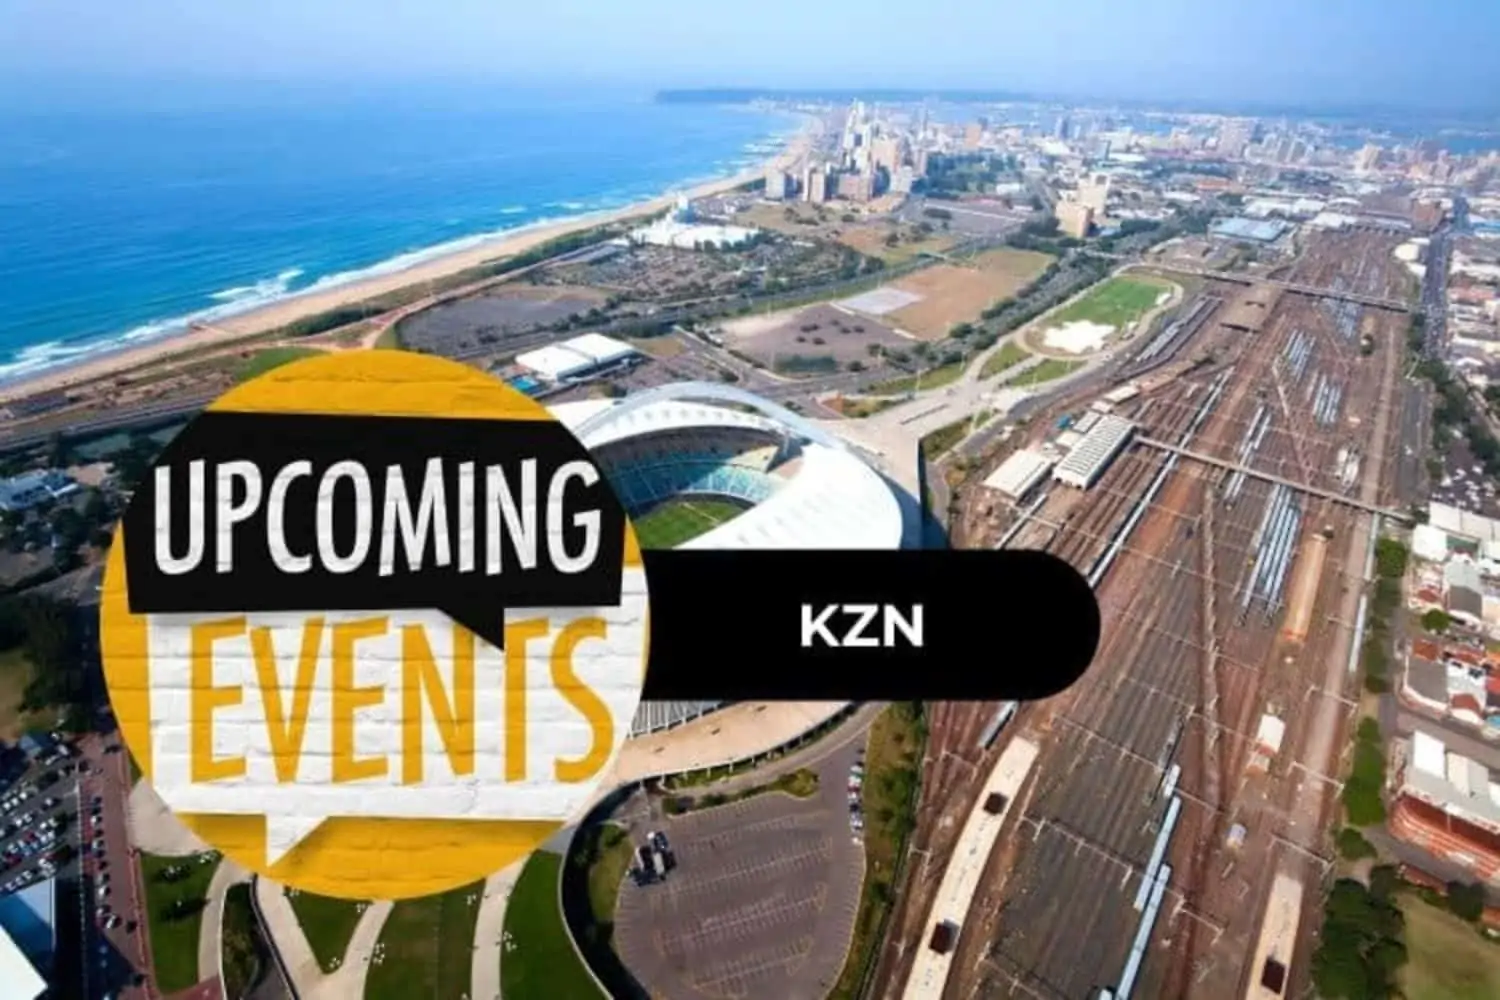 KZN events in July – see what’s happening!